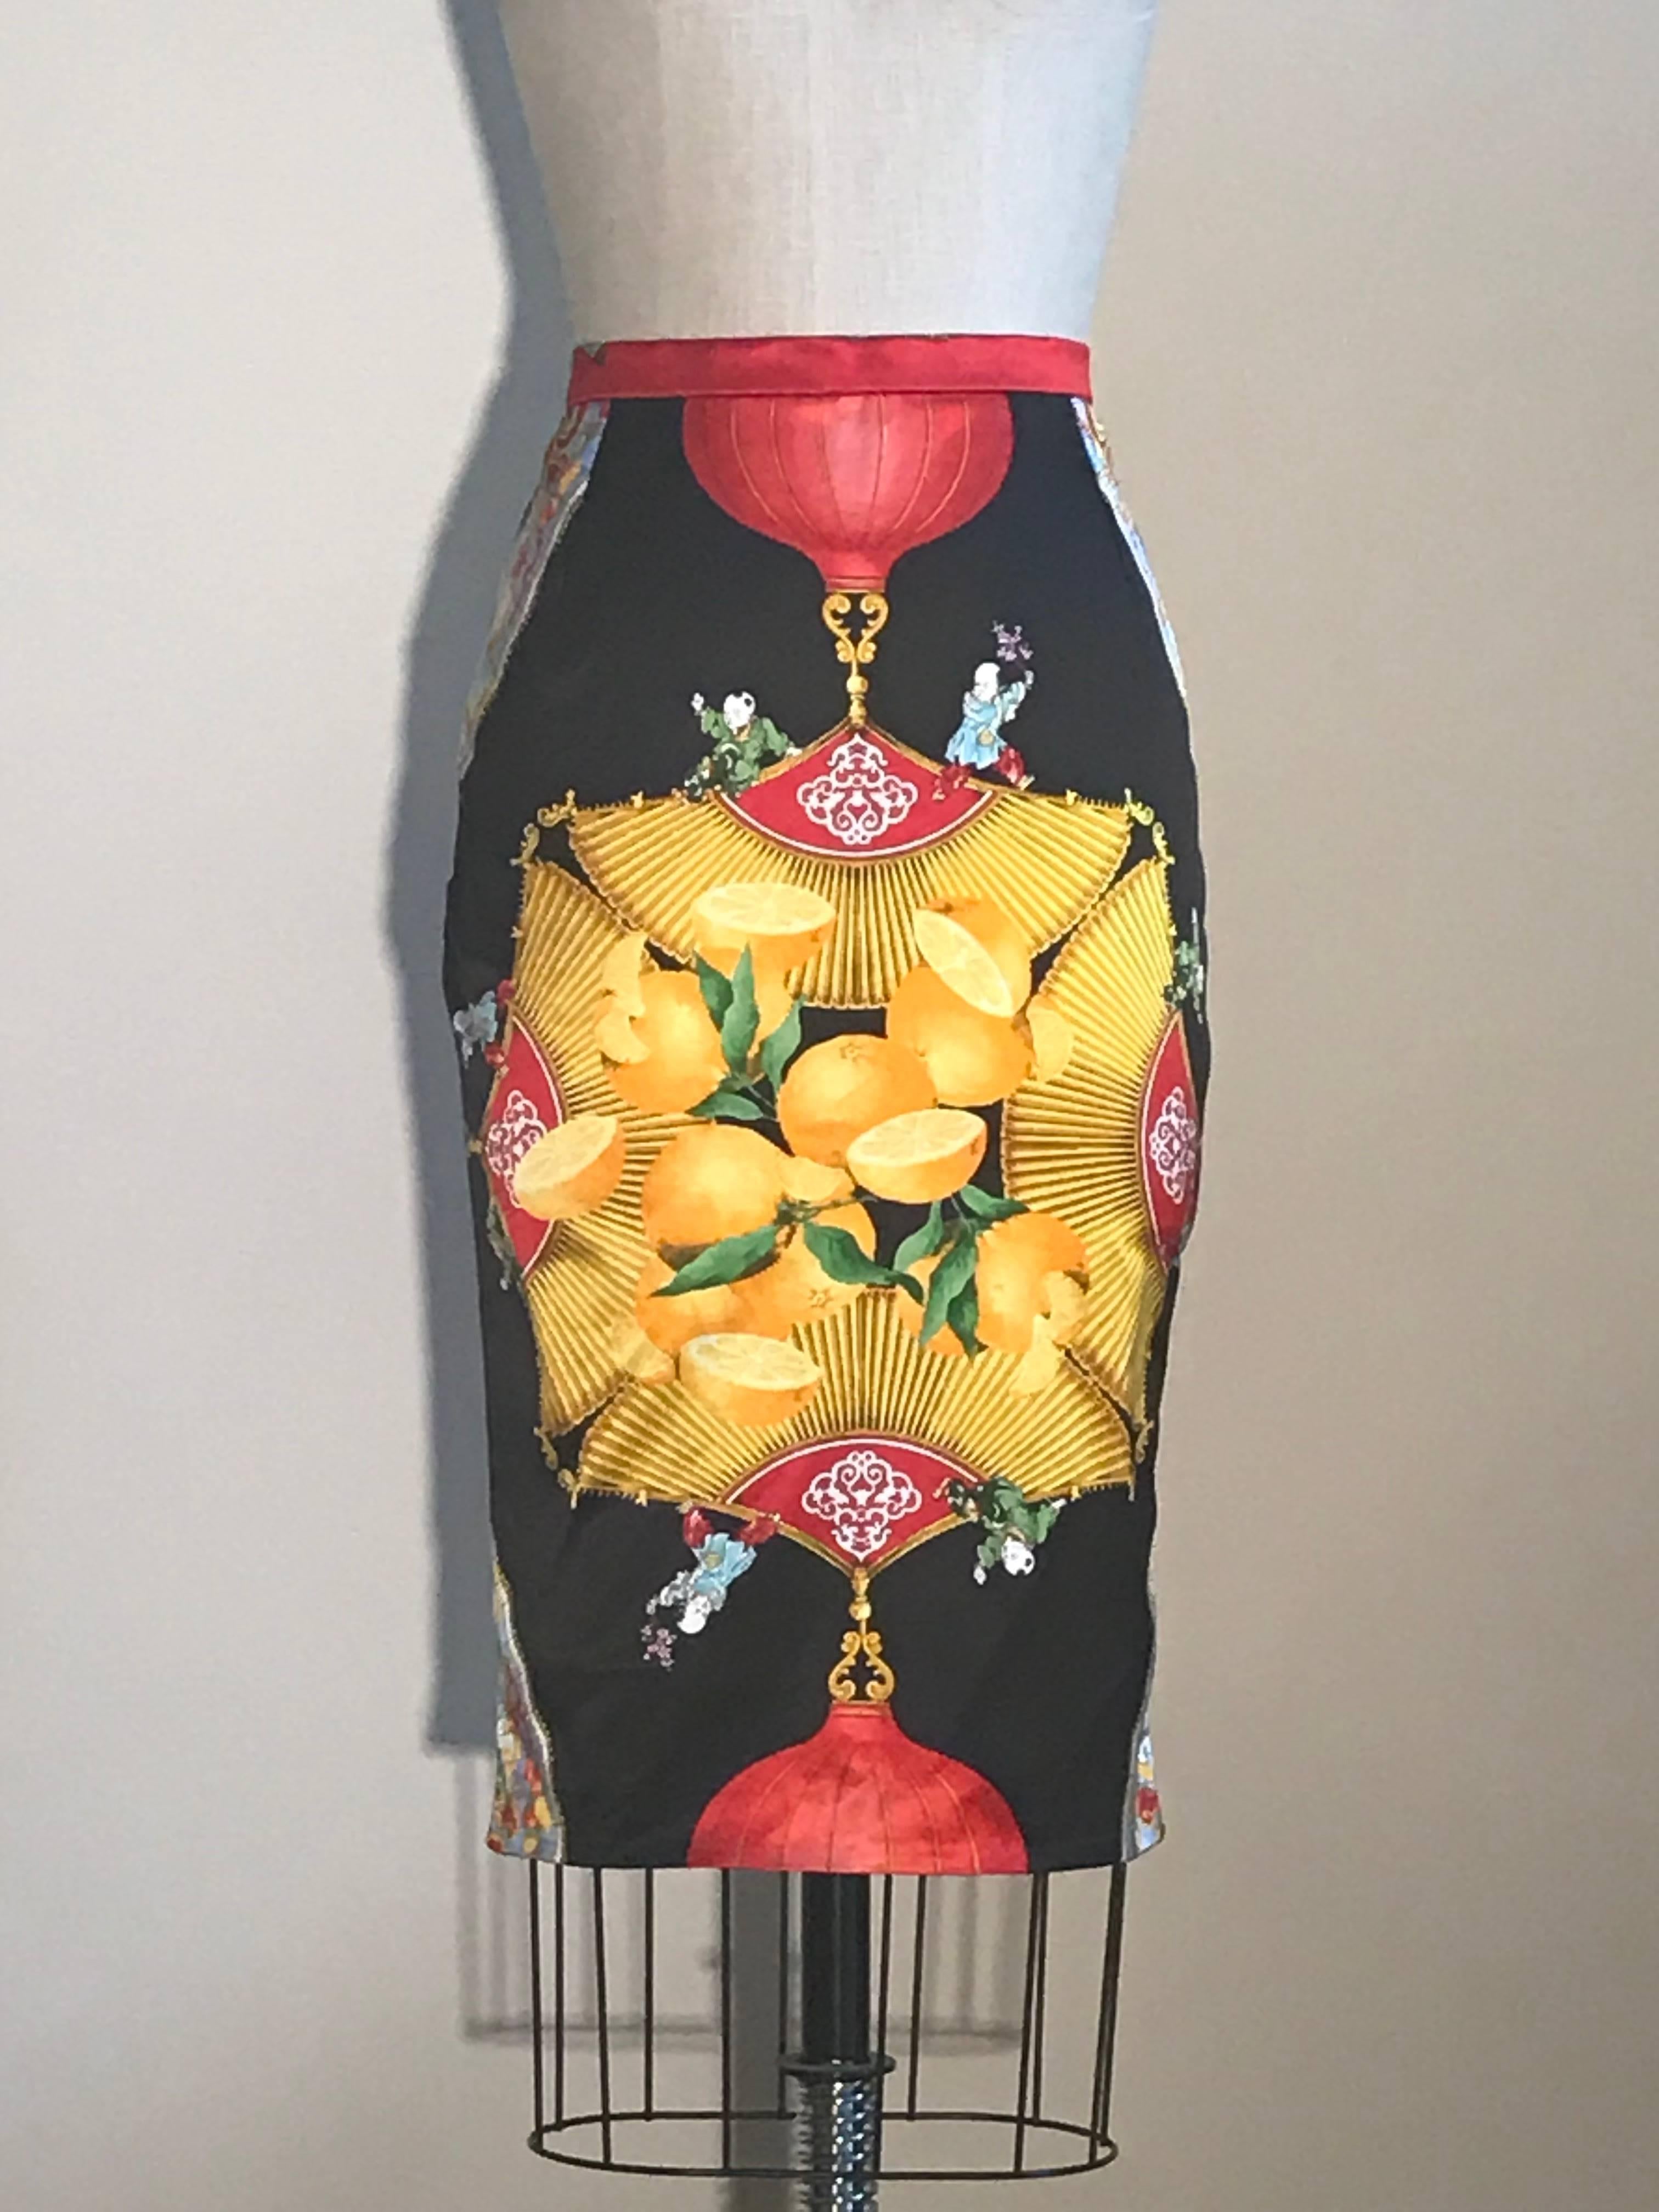 Very rare Dolce & Gabbana 1990s pencil skirt in a whimsical Oriental inspired print featuring citrus fruit, fans, lanterns, tassels, and small frolicking robed men. Back zip and snap.

No content label, most likely a silk polyamide elastane